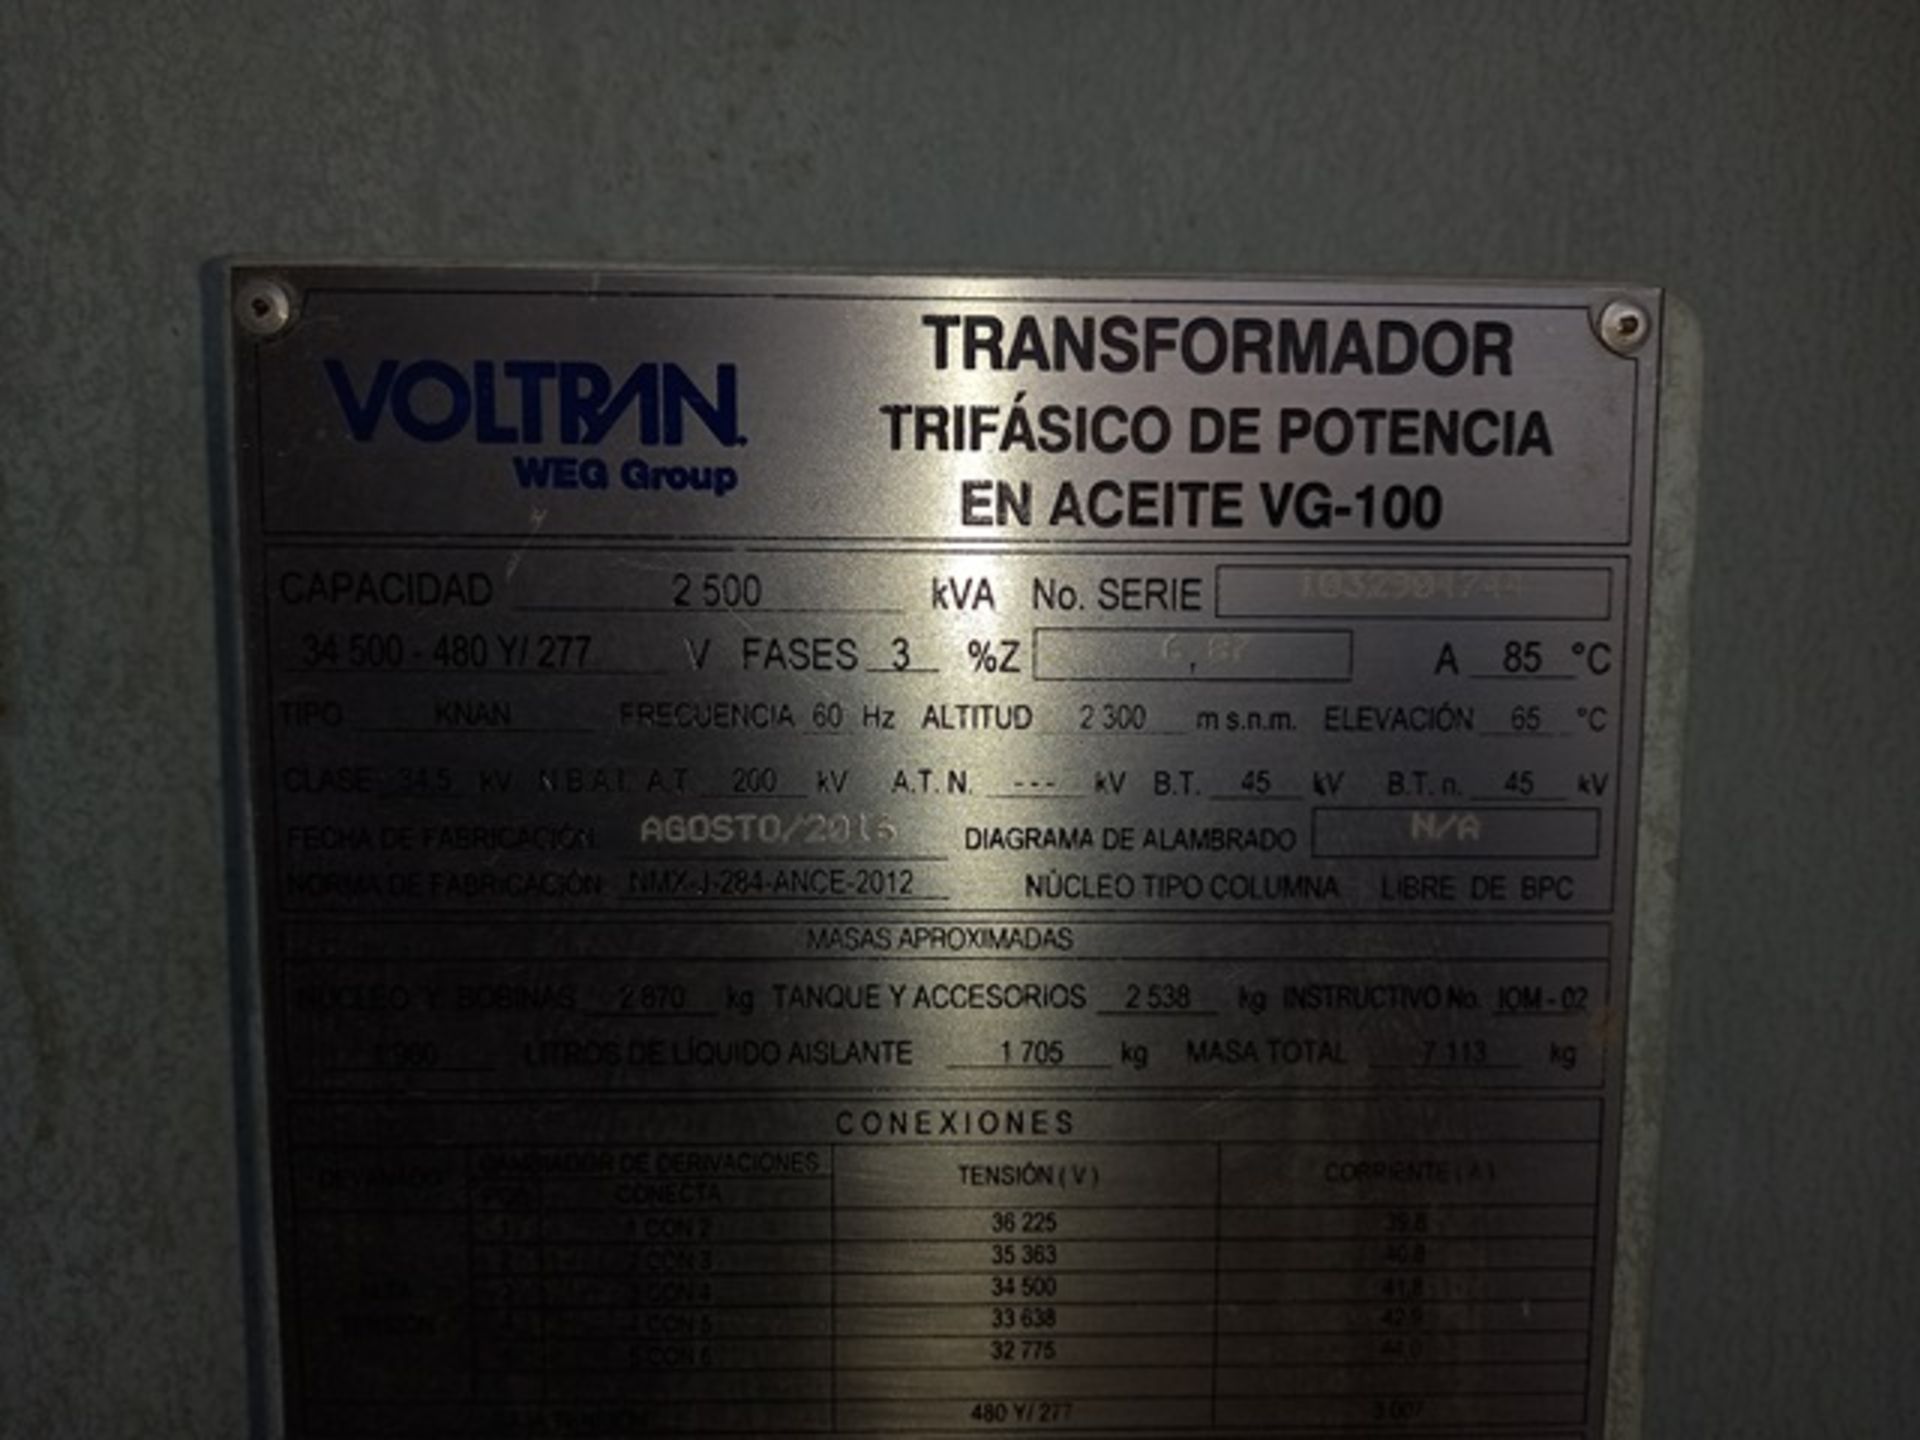 2500 KVA Electric Transformer, 34,500-480Y/277 V, Serial Number: 1032904744, Year 2016 - Image 5 of 7